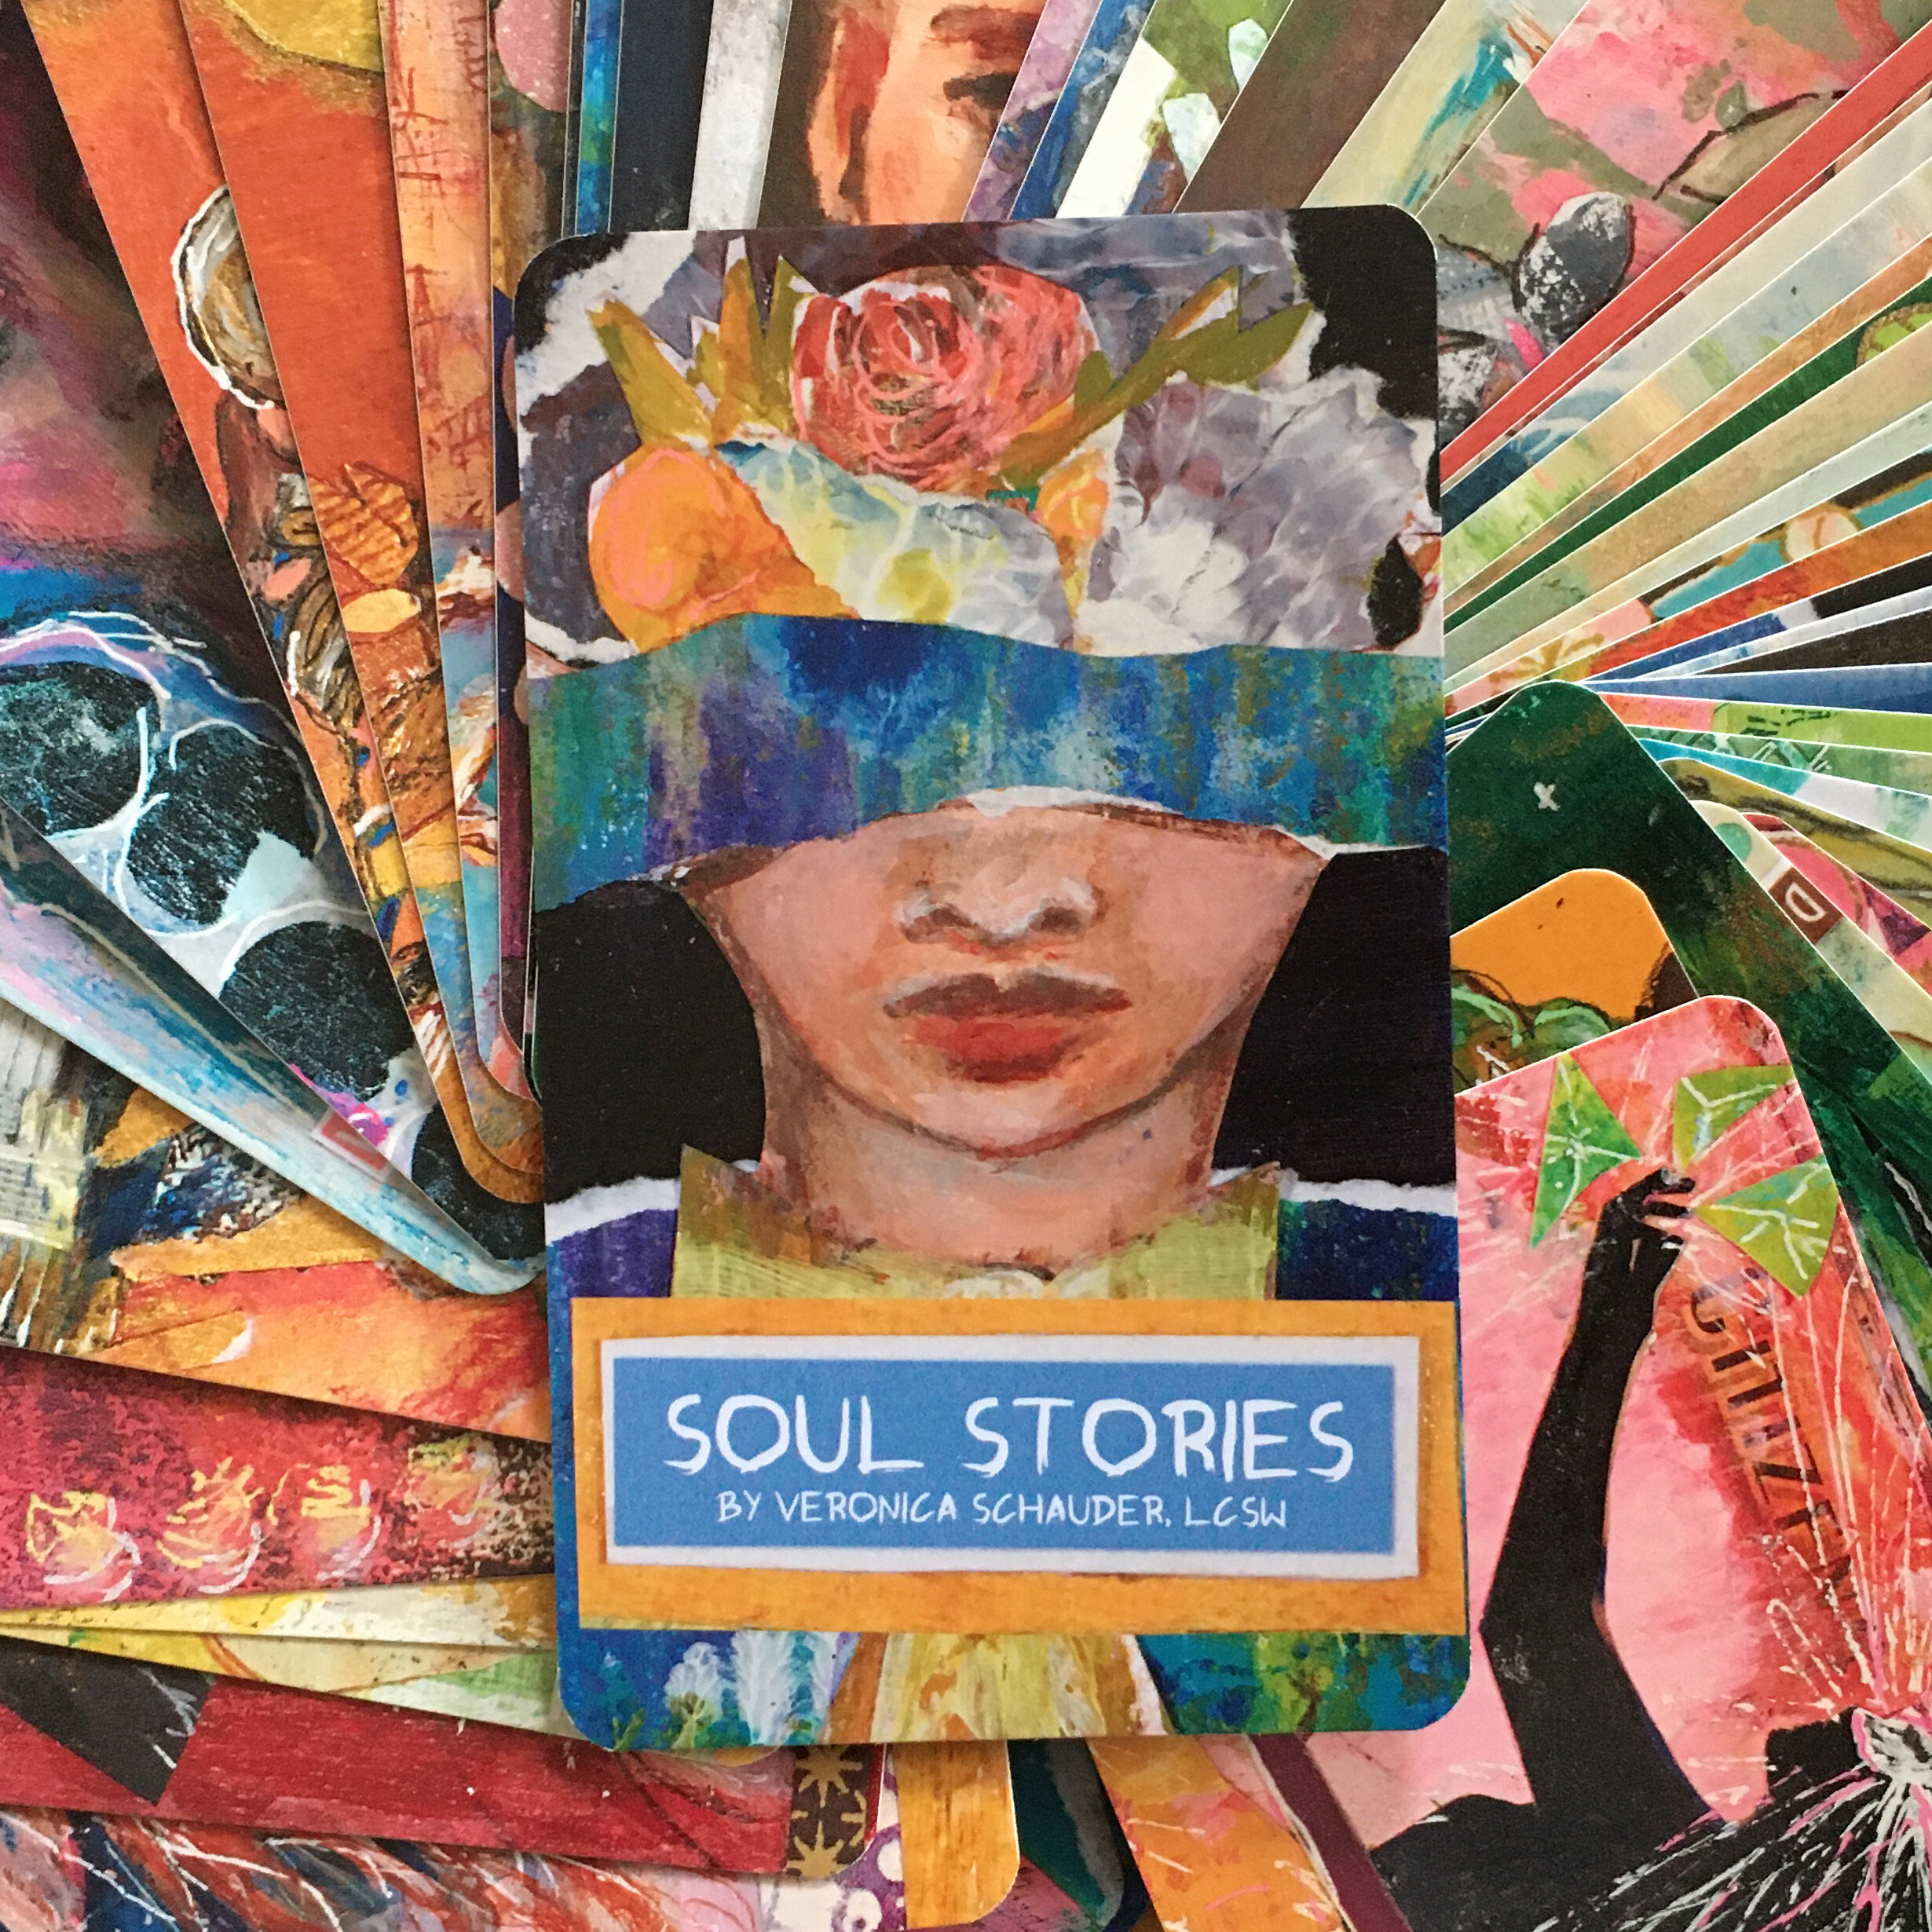 SOUL STORIES Oracle Deck by Veronica Schauder, LCSW